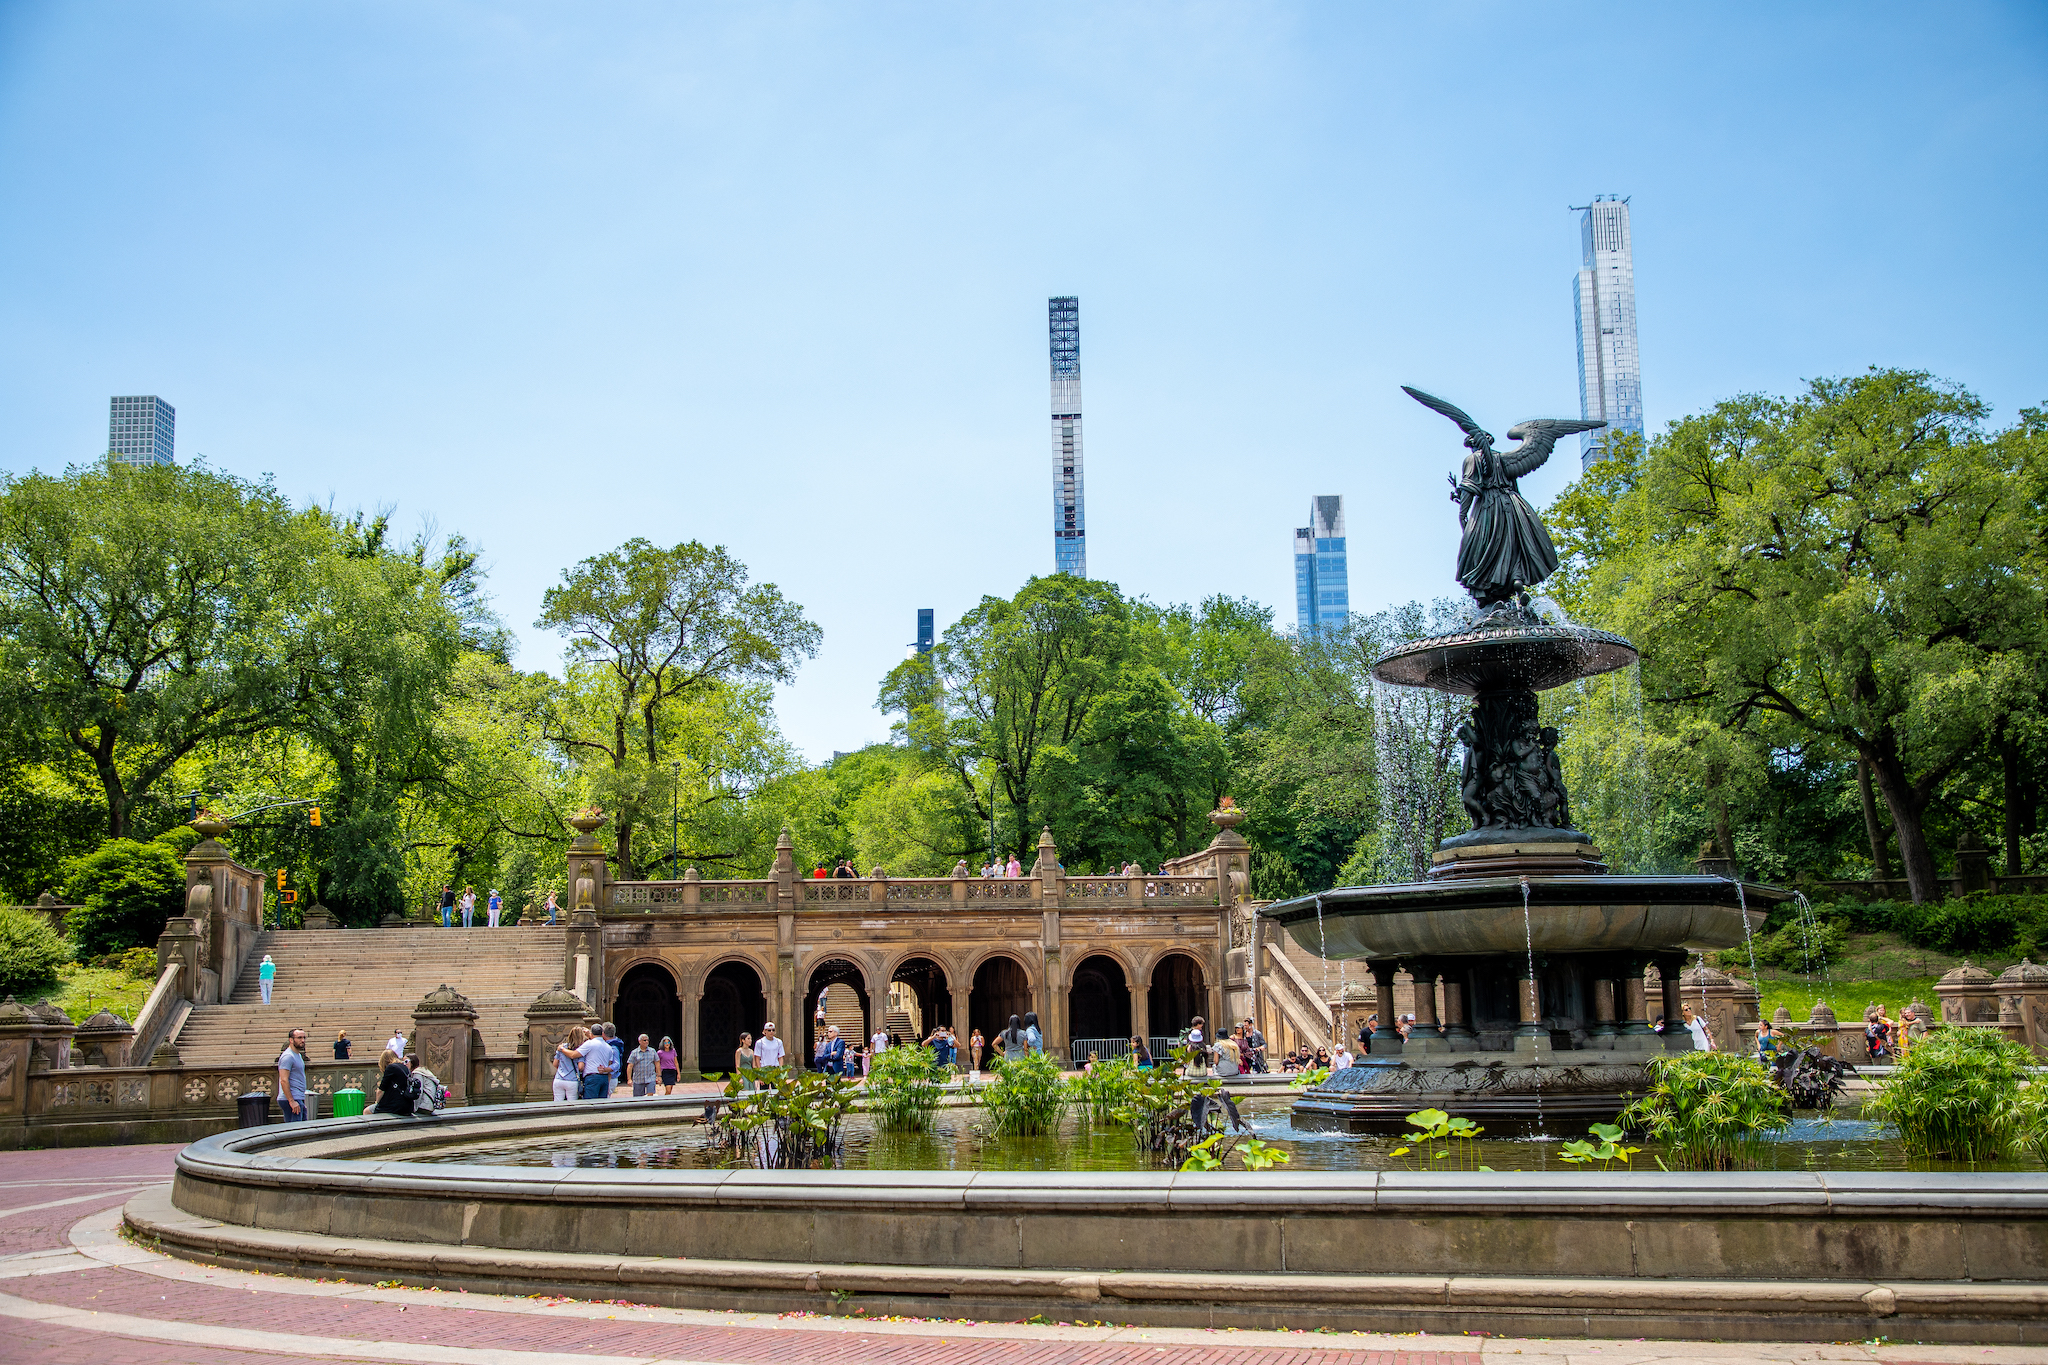 Bethesda Terrace: Central Park Attraction Facts